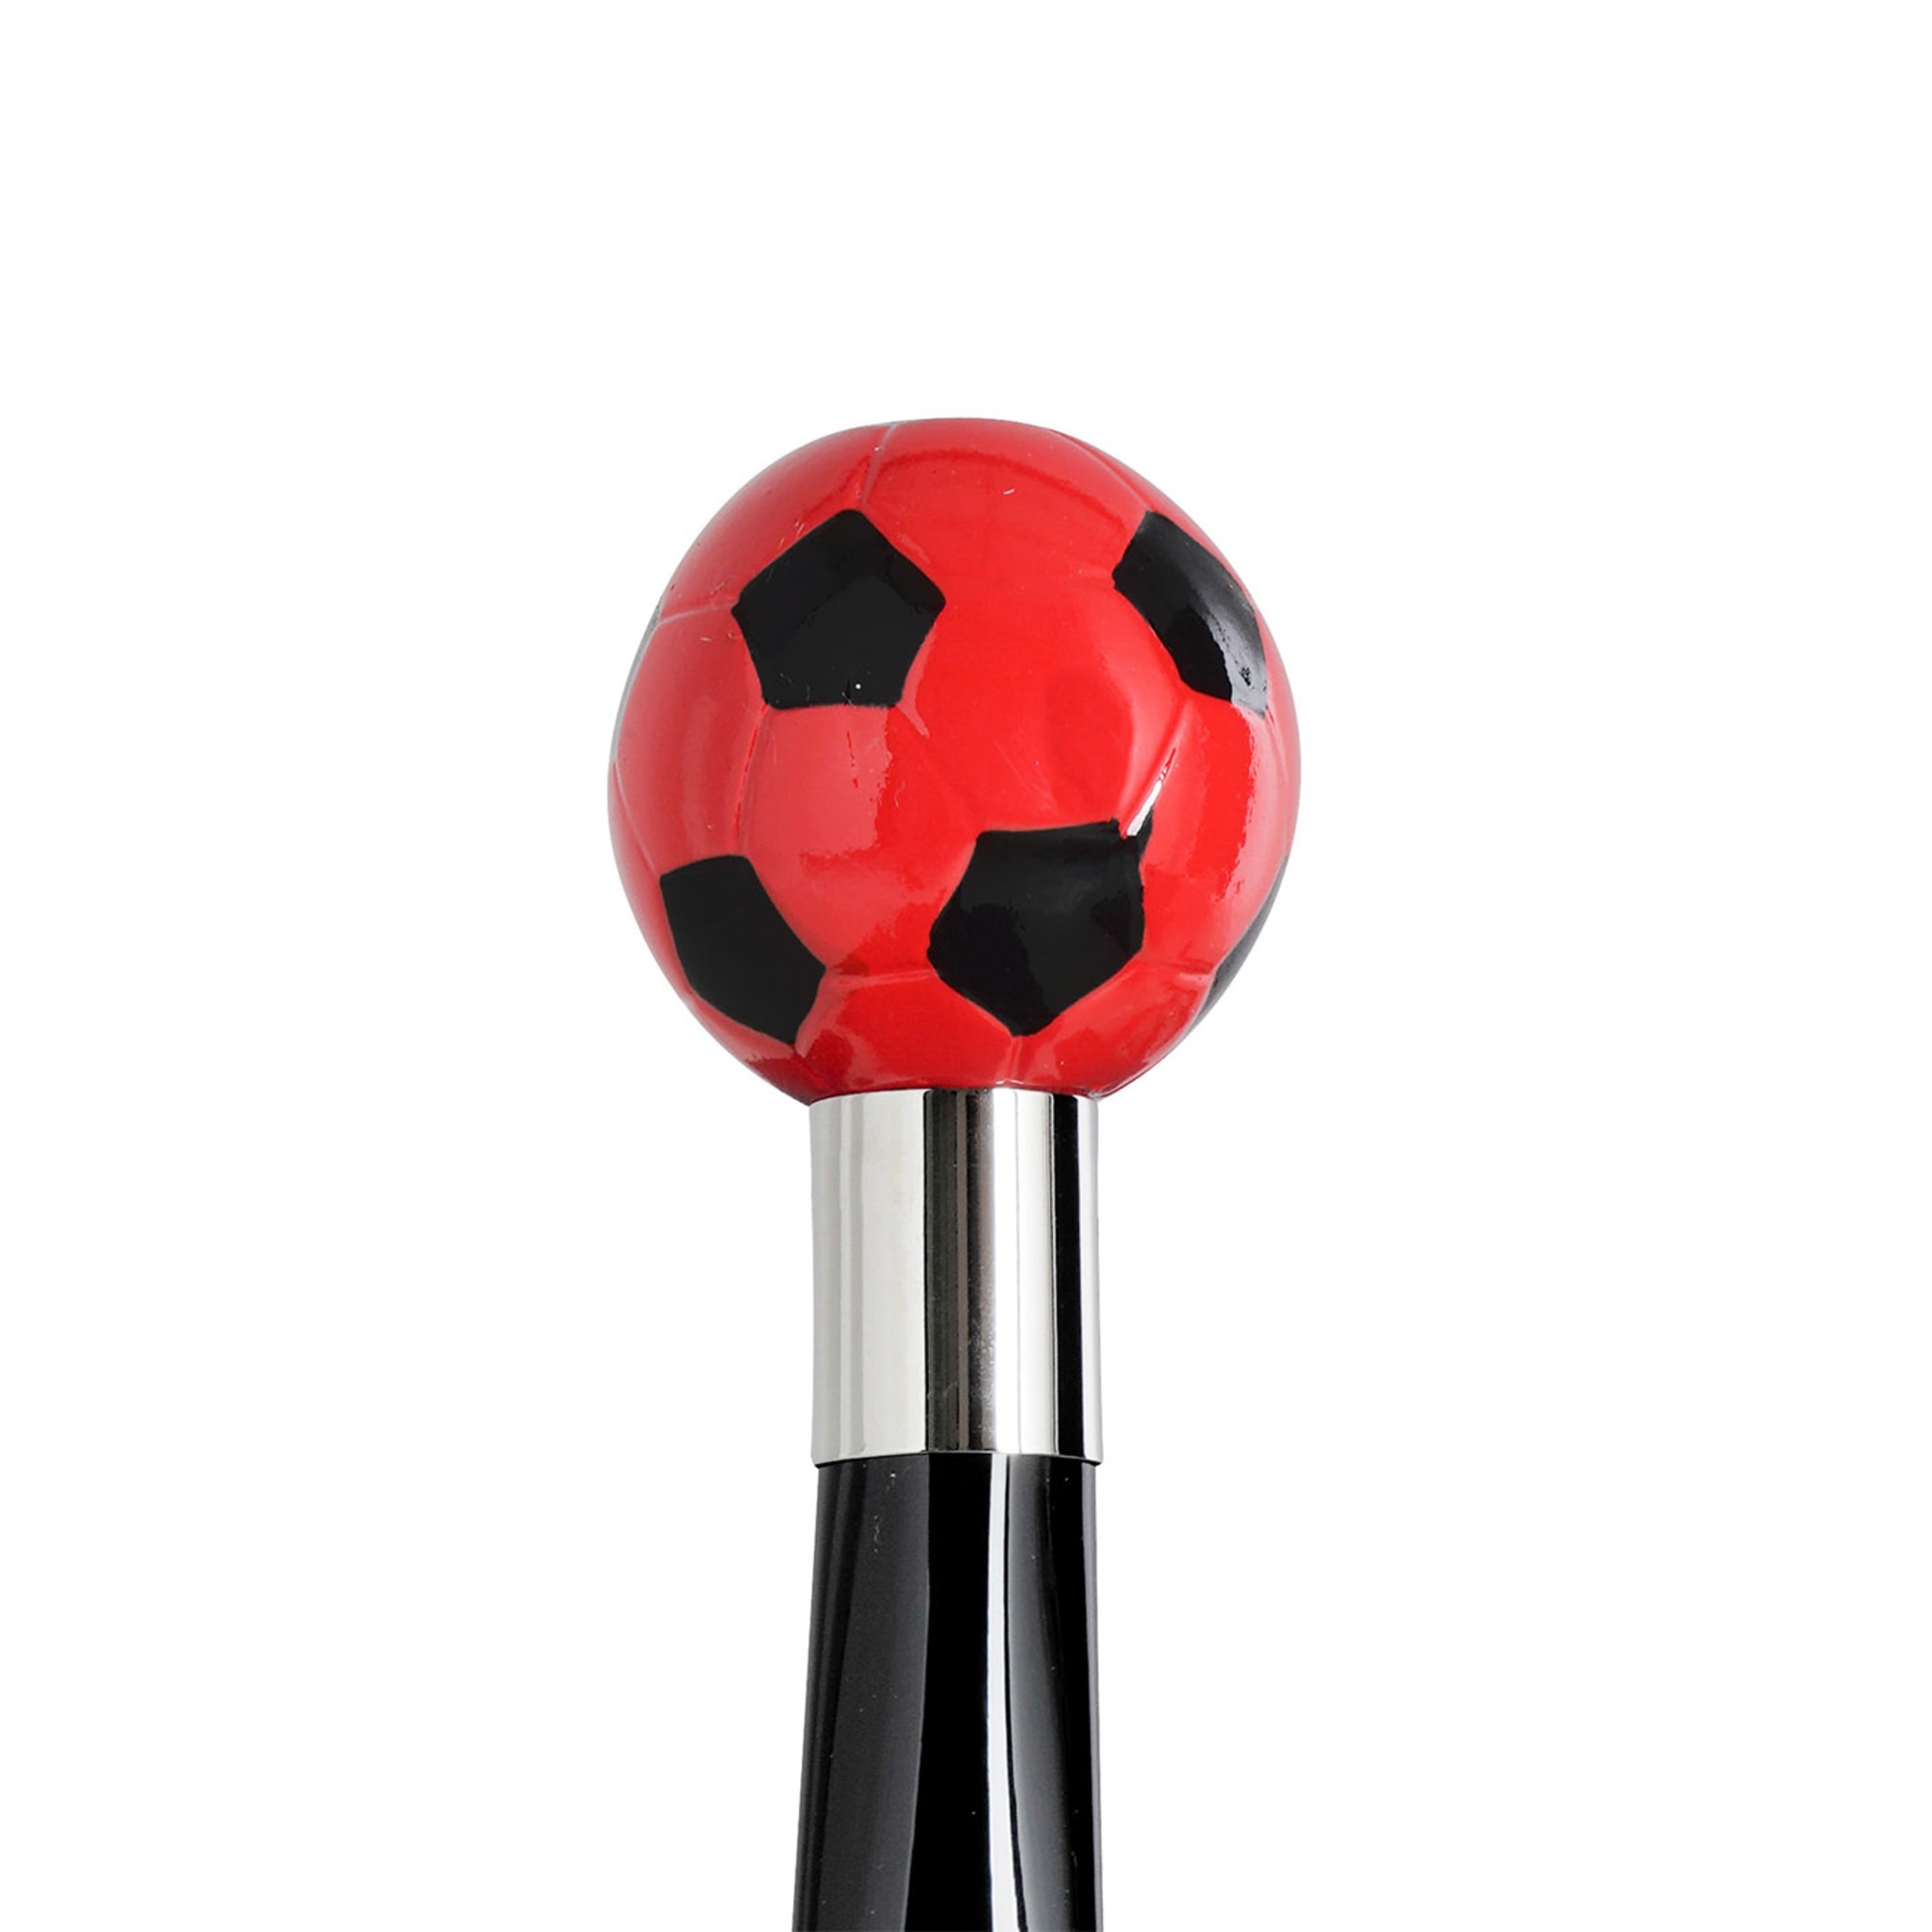 Calcio Small Black & Red Decorated Shoehorn - Alternative view 1